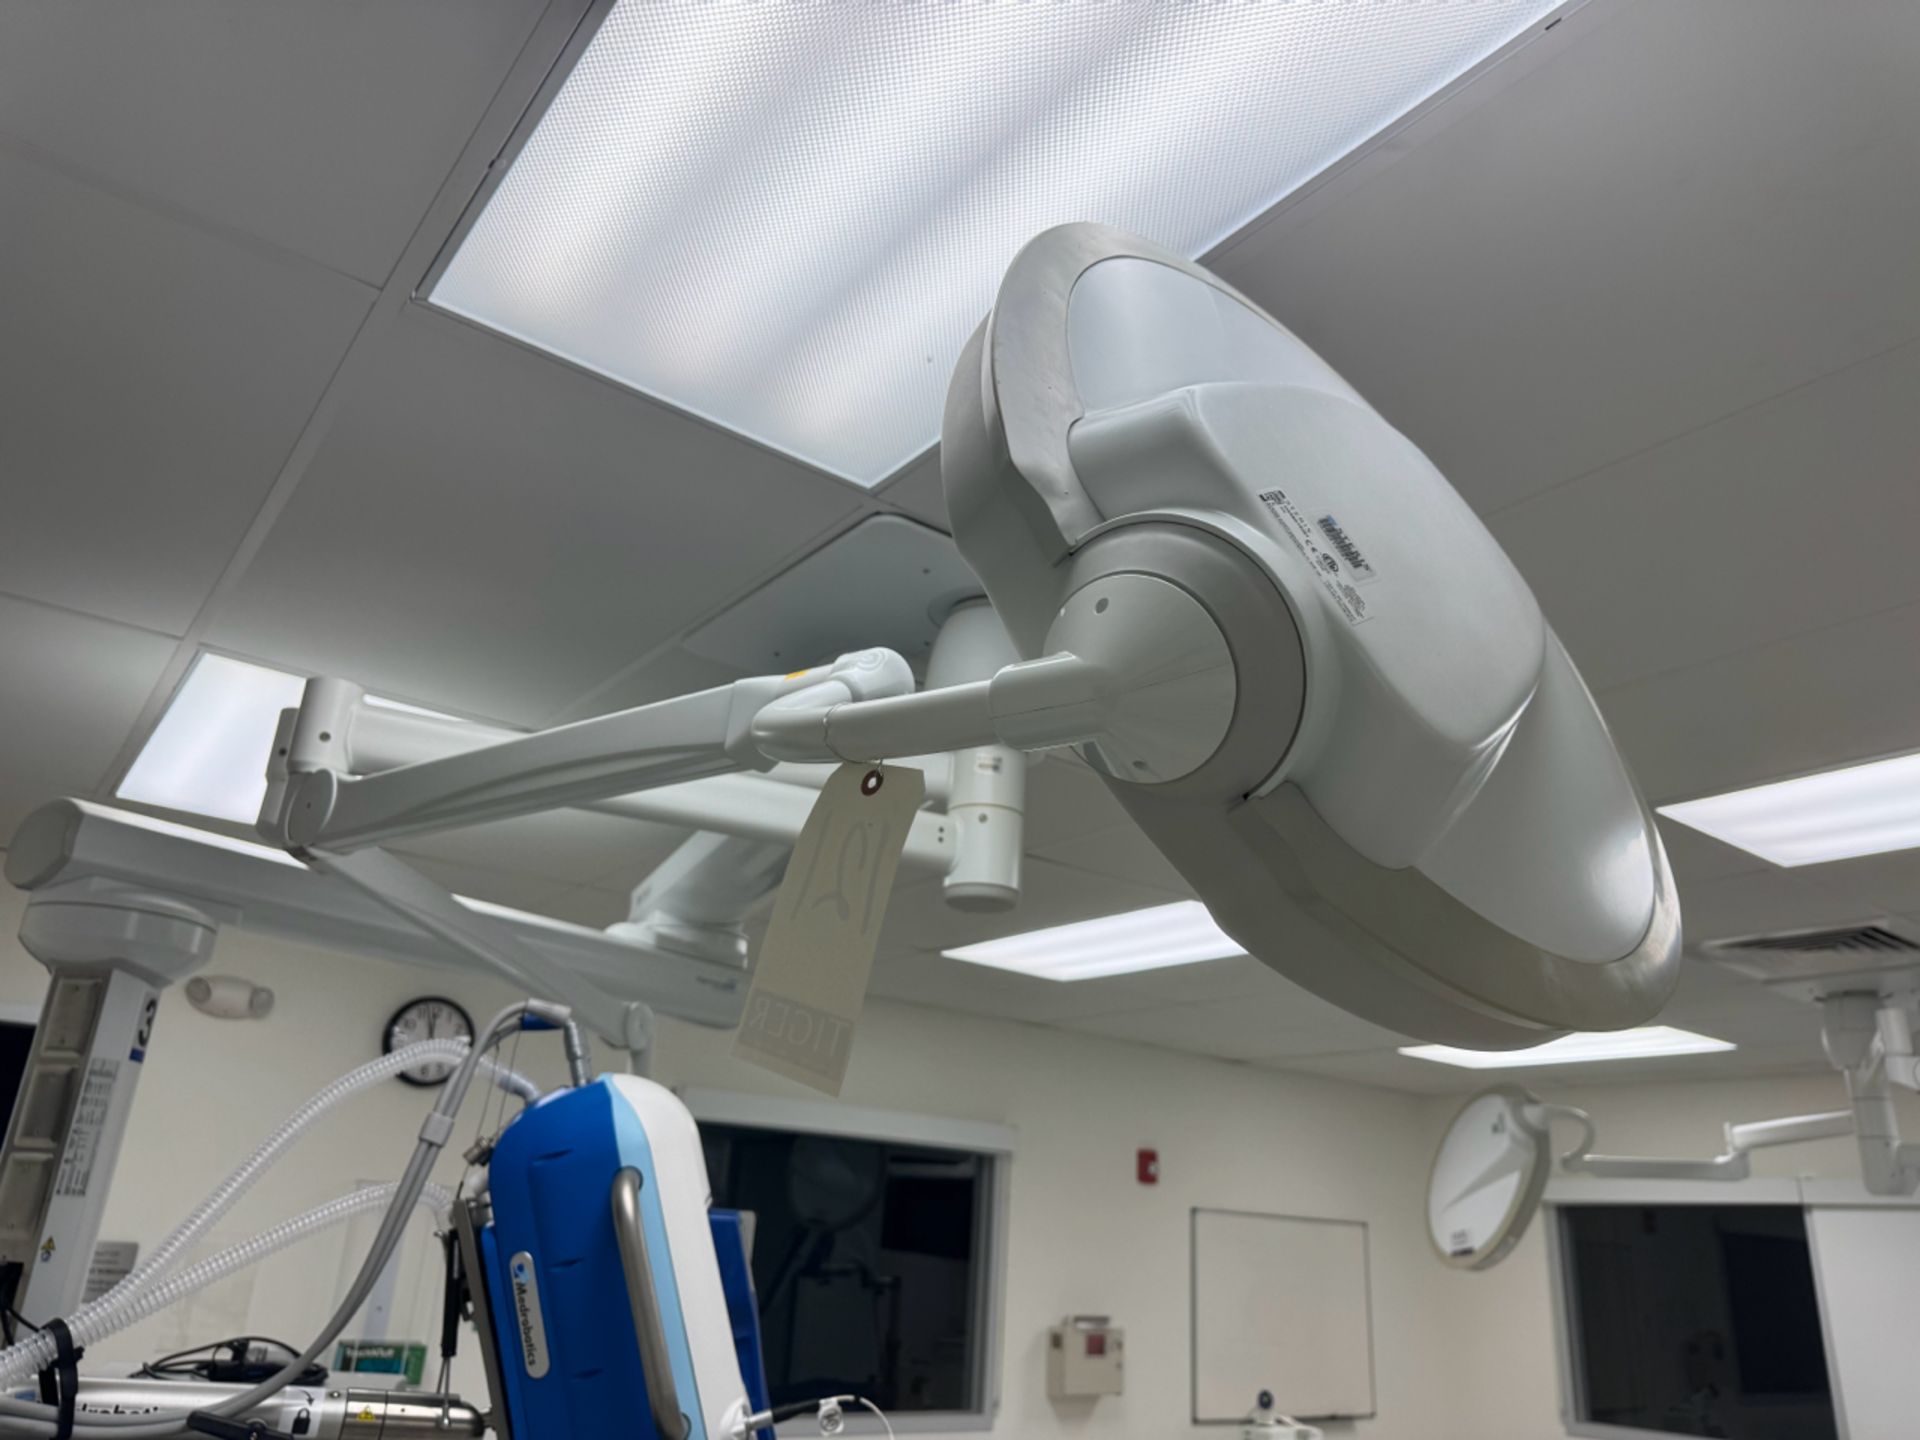 Steris Surgical Lighting System - Image 4 of 6